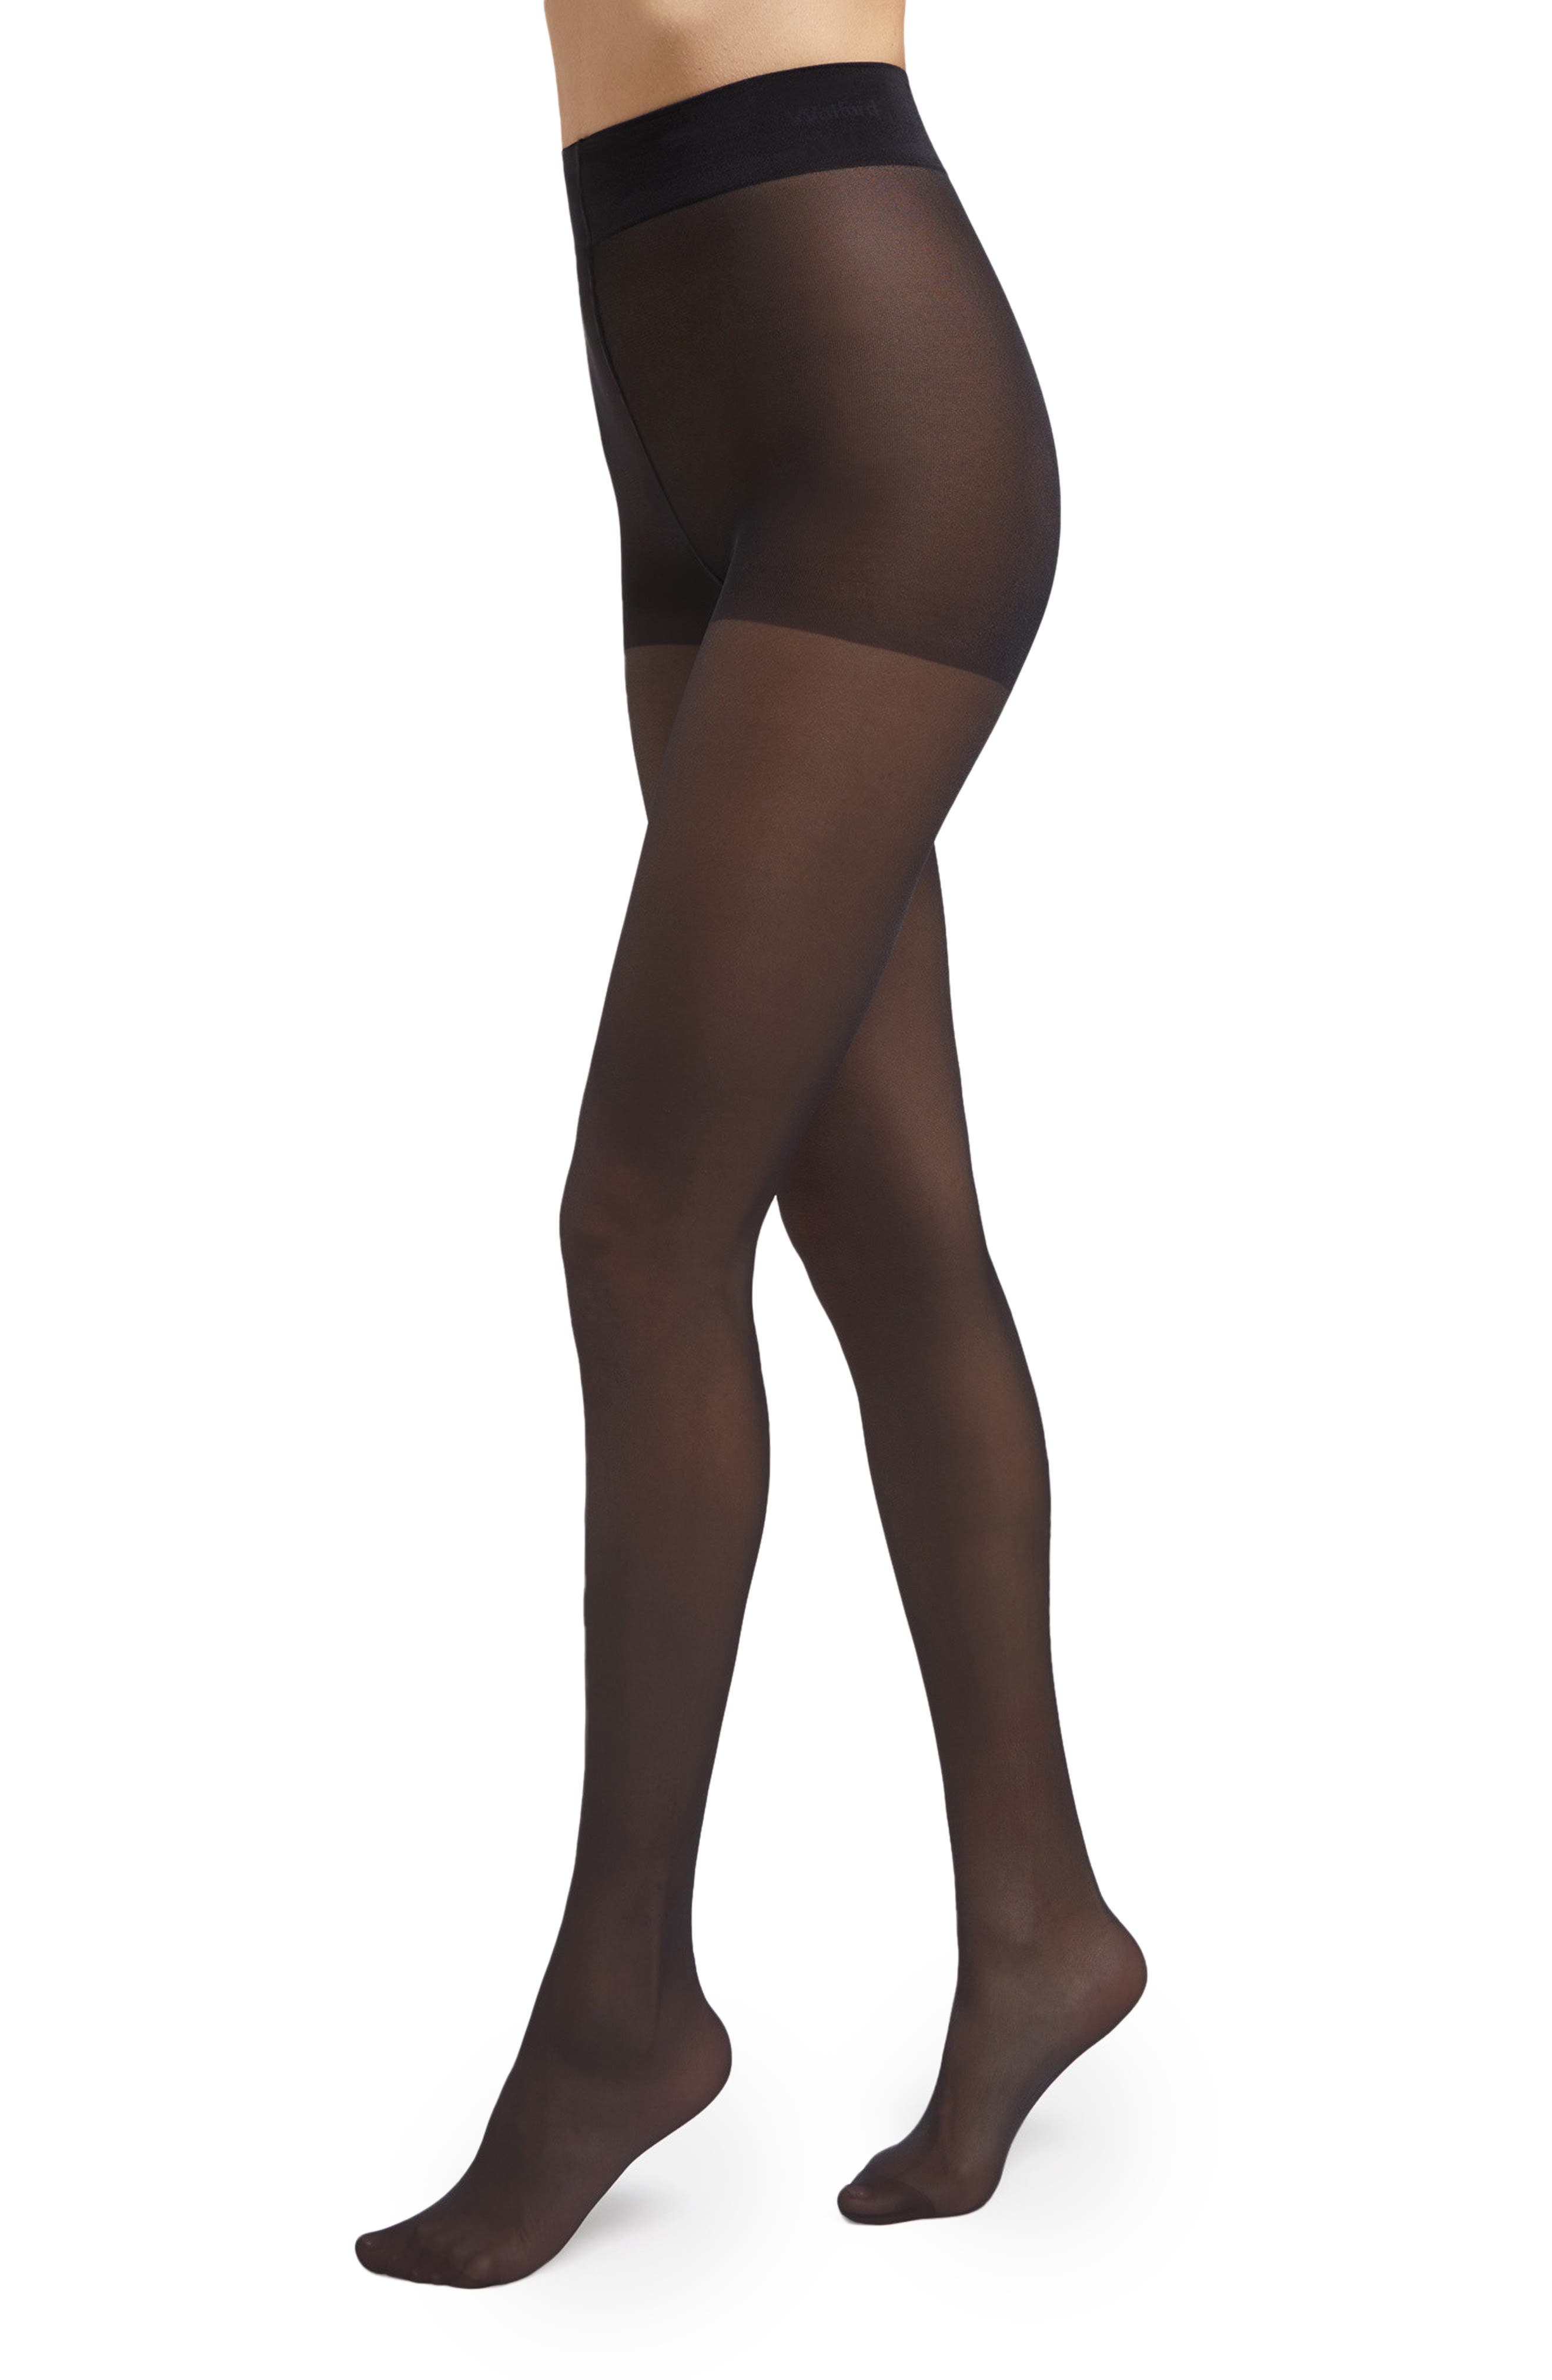 Pantyhose Wolford Neon 40